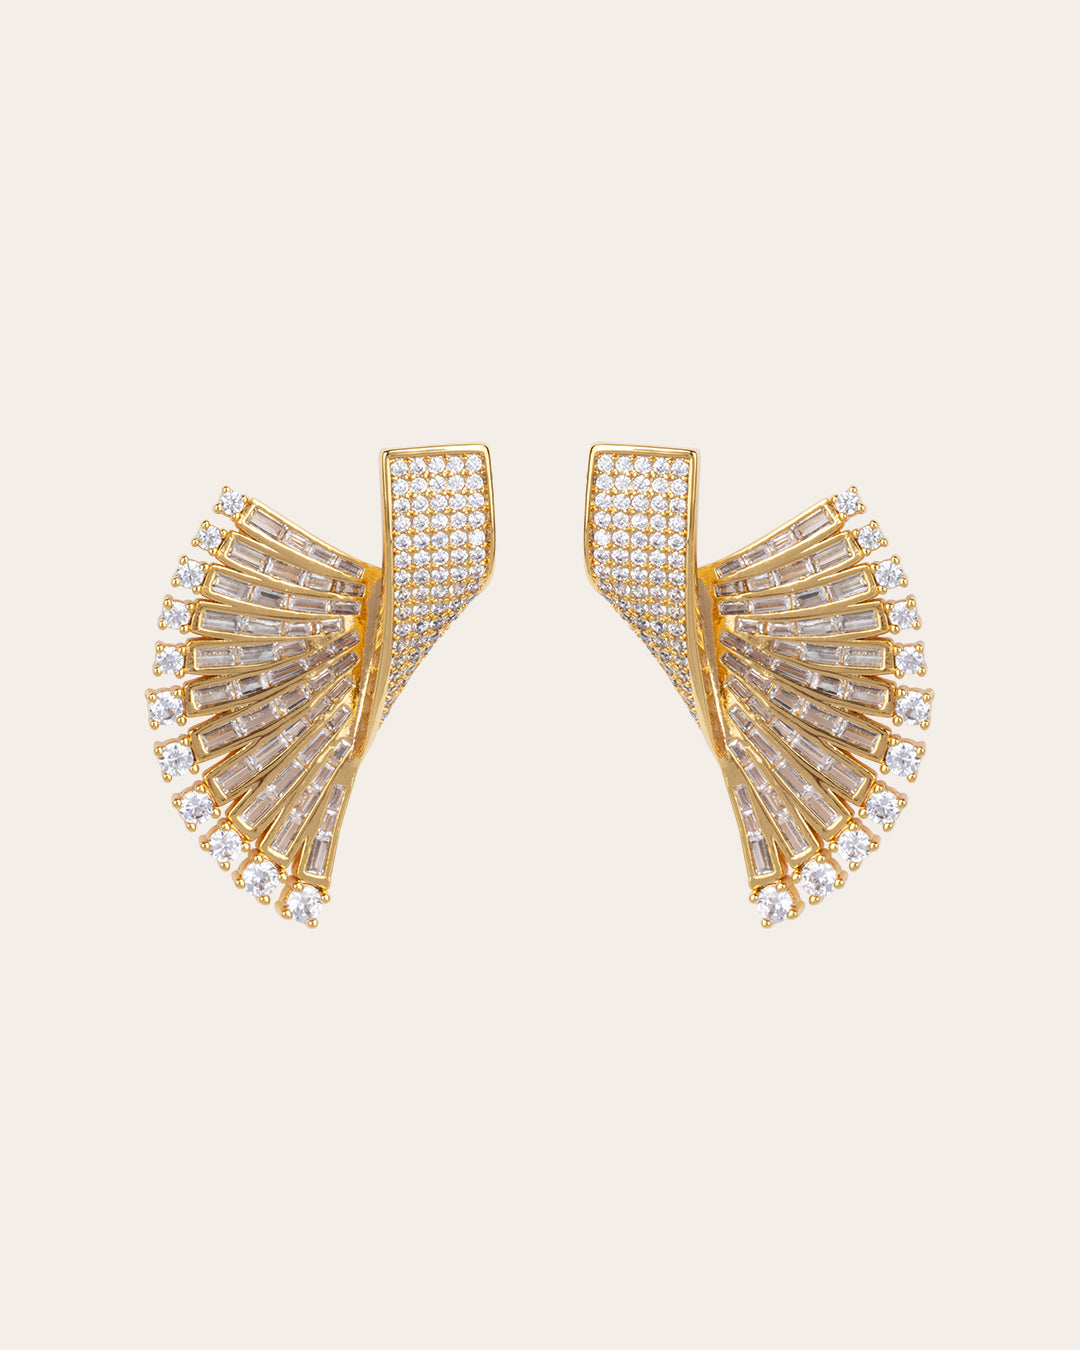 The Mirage earrings - gold plated